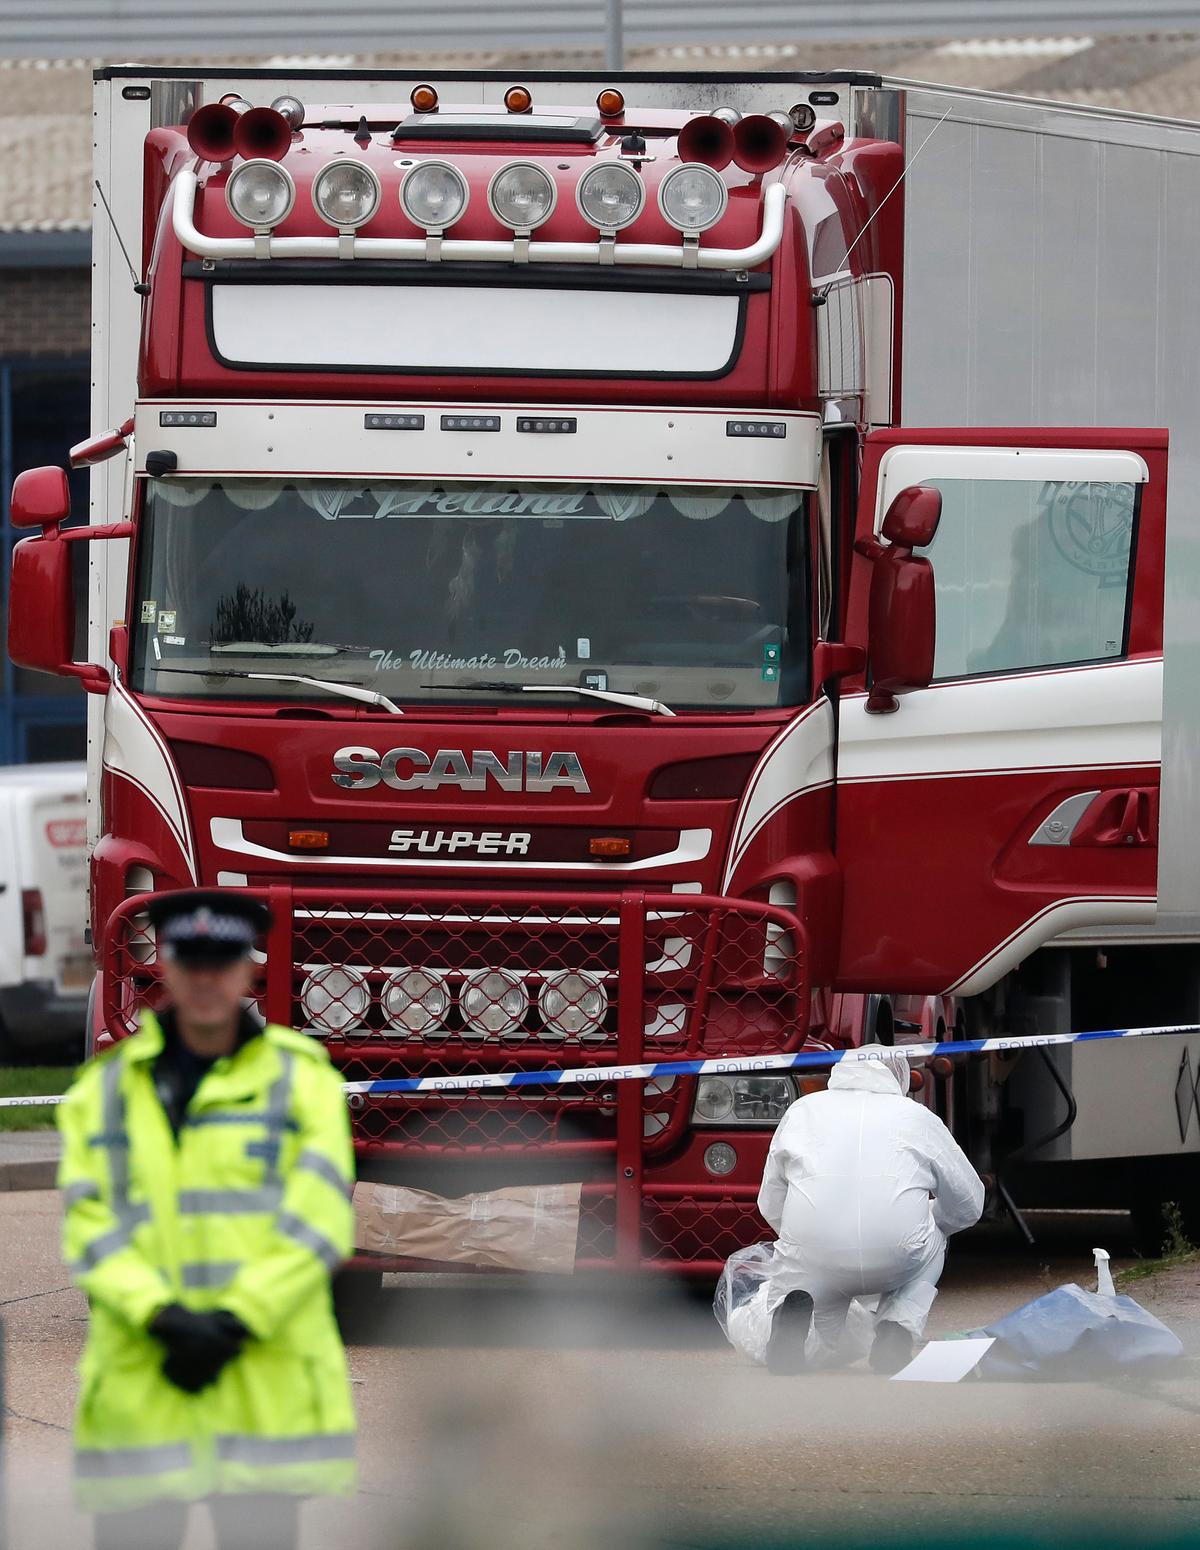 Police forensic officers attend the scene after a truck was found to contain a large number of dead bodies, in Thurrock, South England, on Oct. 23, 2019. (Alastair Grant/AP)